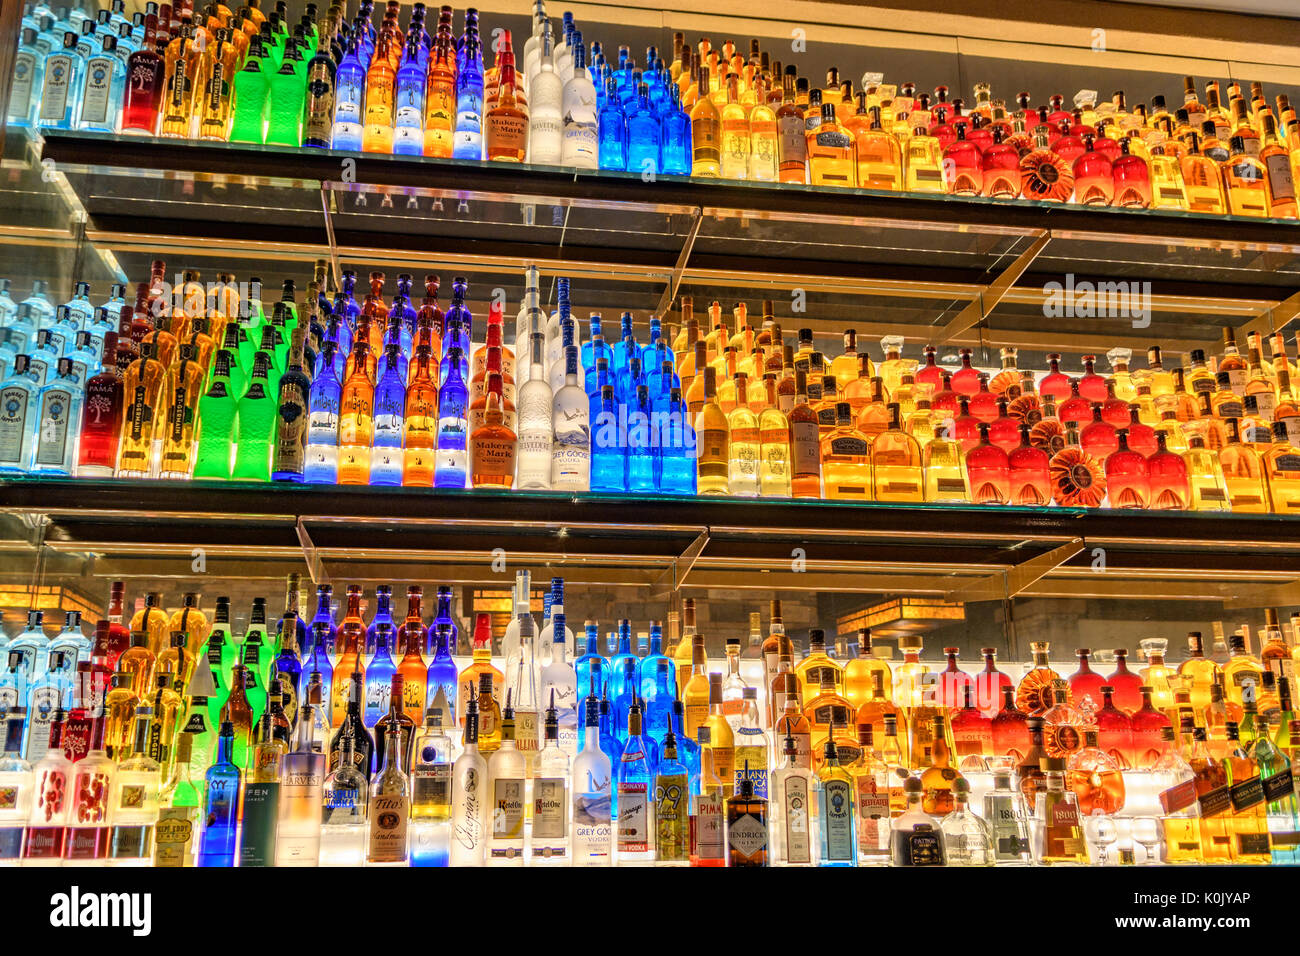 Firebird's Bar and Grill restaurant in Montgomery, Alabama lighted backbar shelving with hundreds of brightly colored liquor bottles on display. Stock Photo